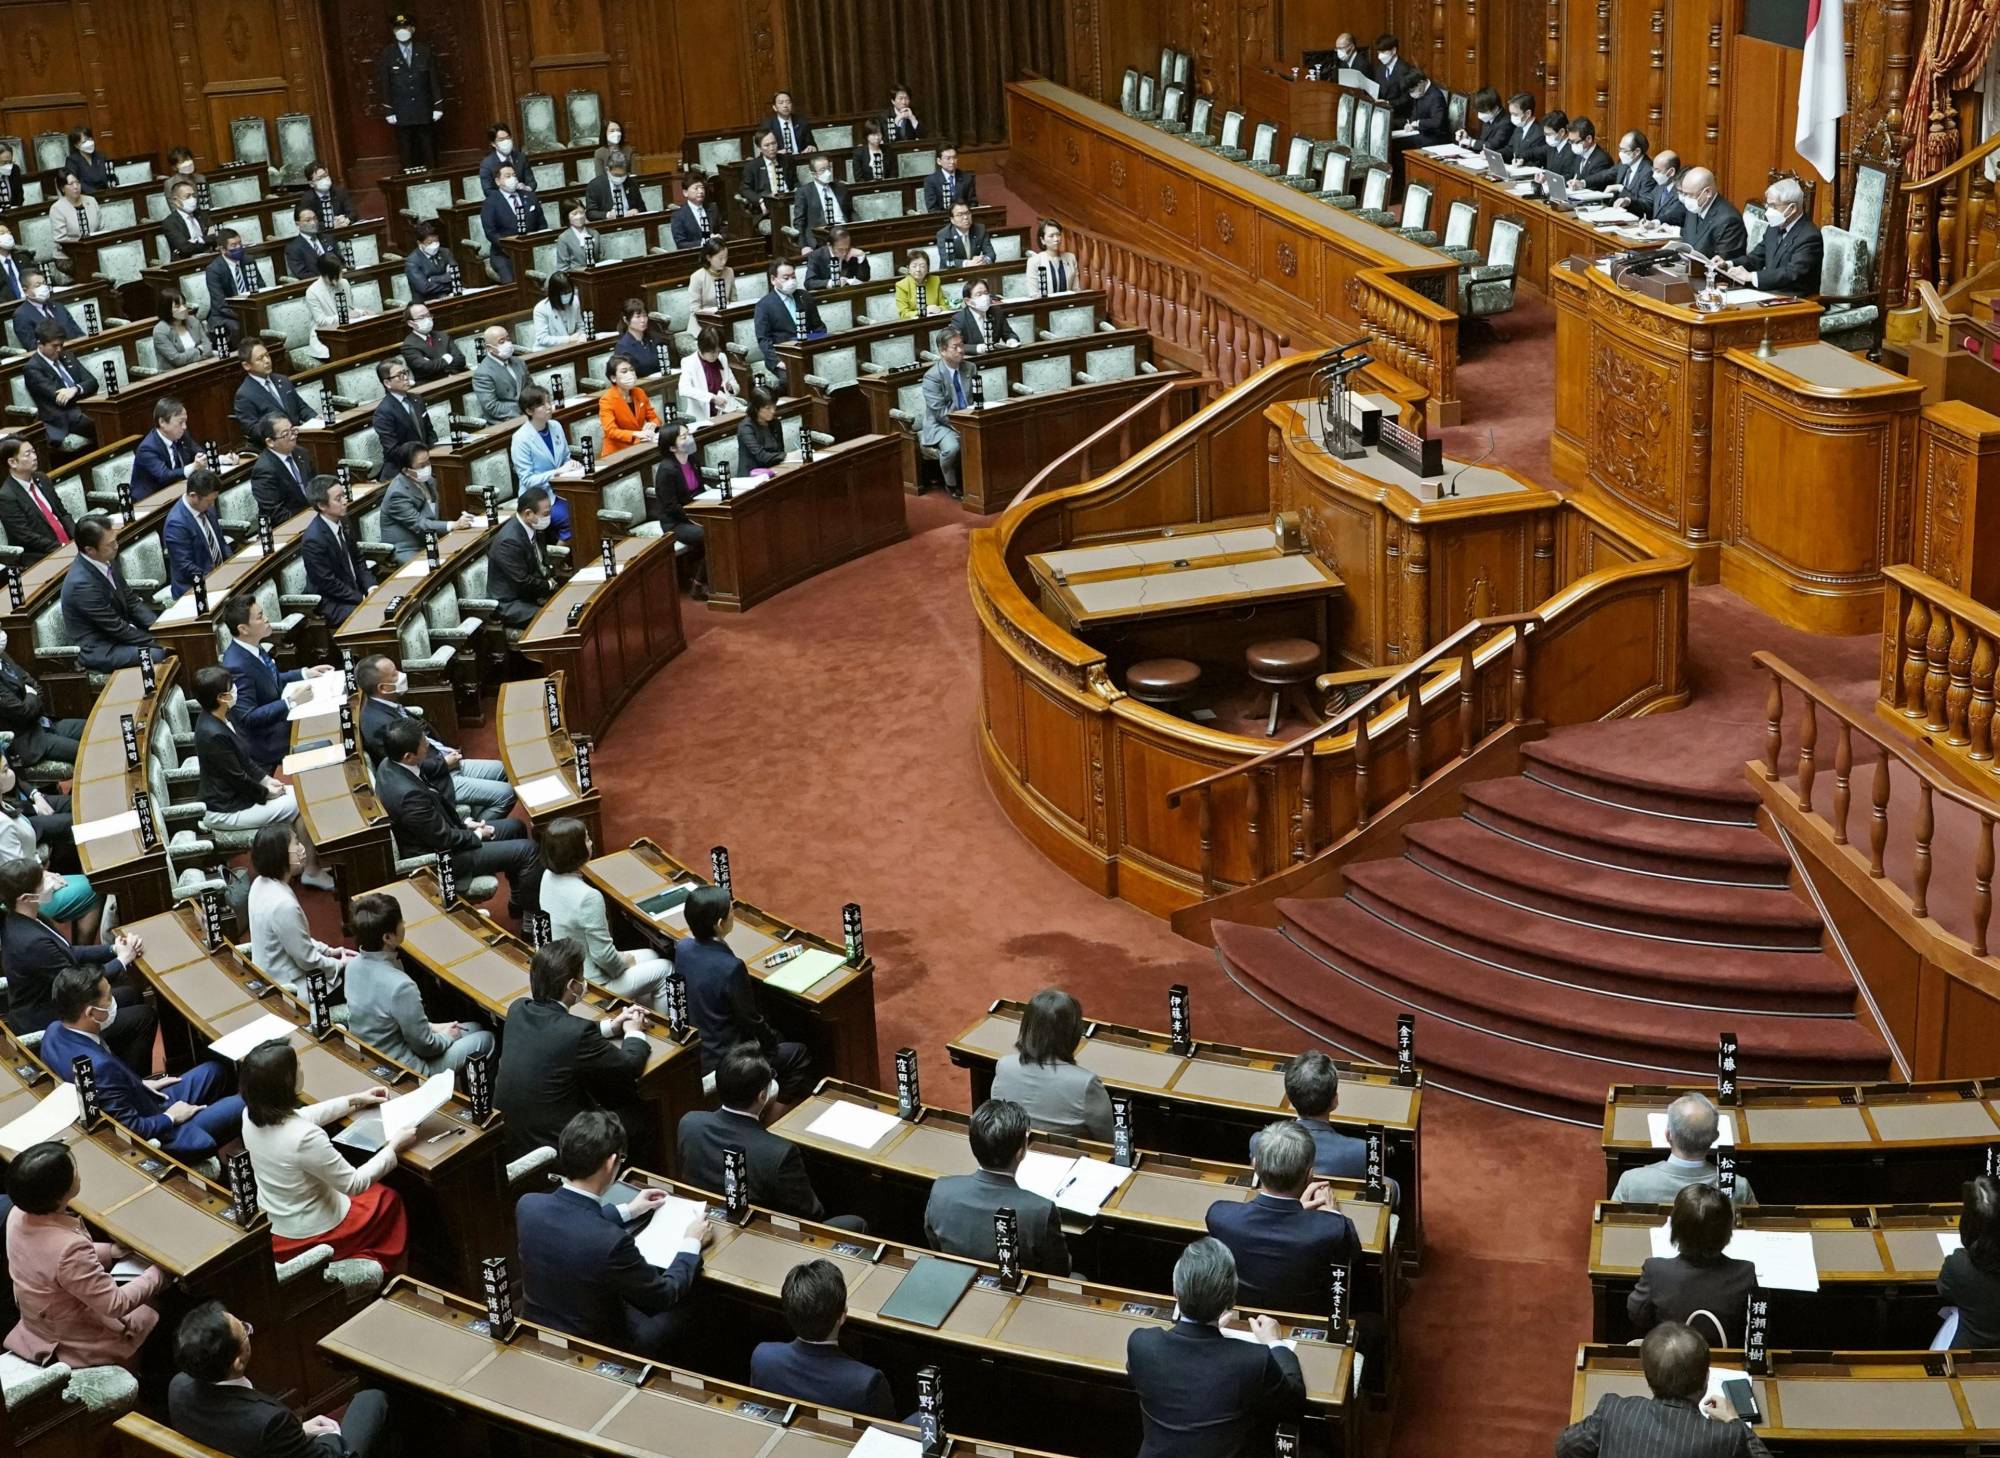 The Upper House approves a motion calling for the expulsion of GaaSyy at a plenary session on Wednesday. | KYODO